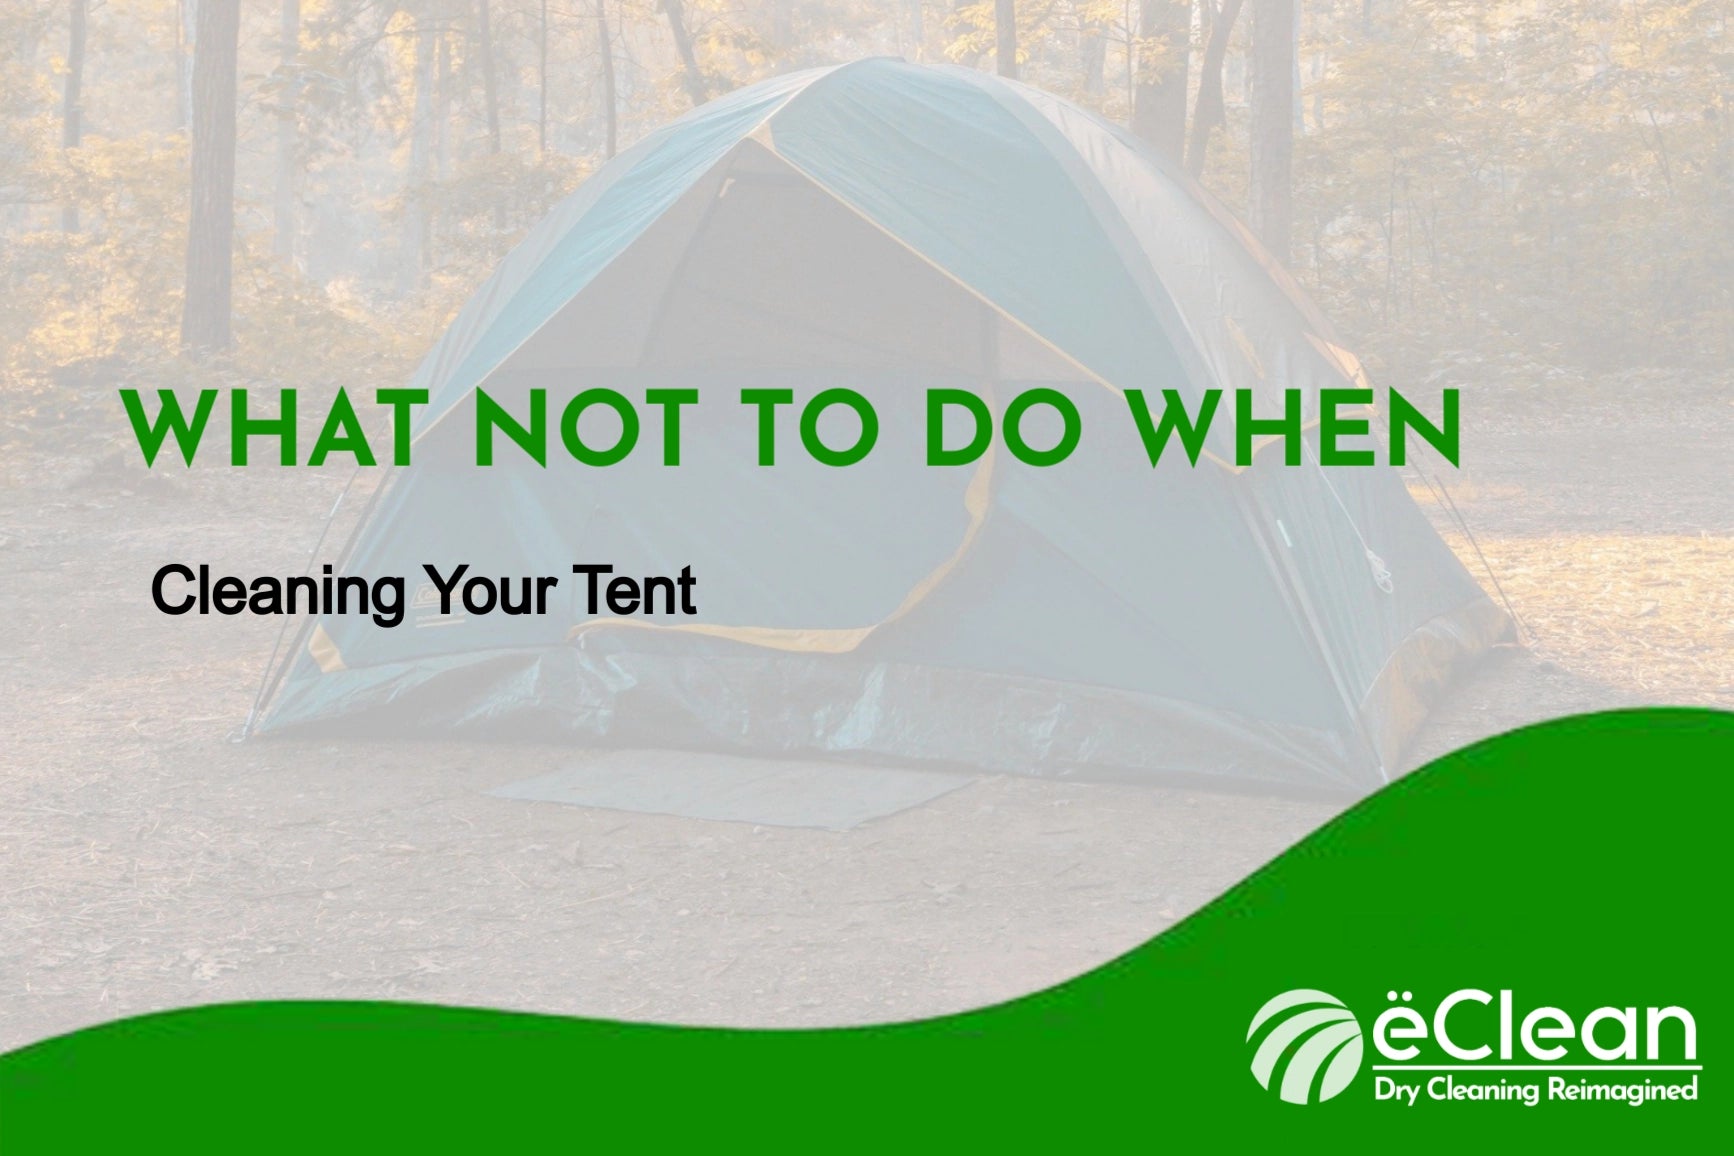 What Not to Do When Cleaning Your Tent